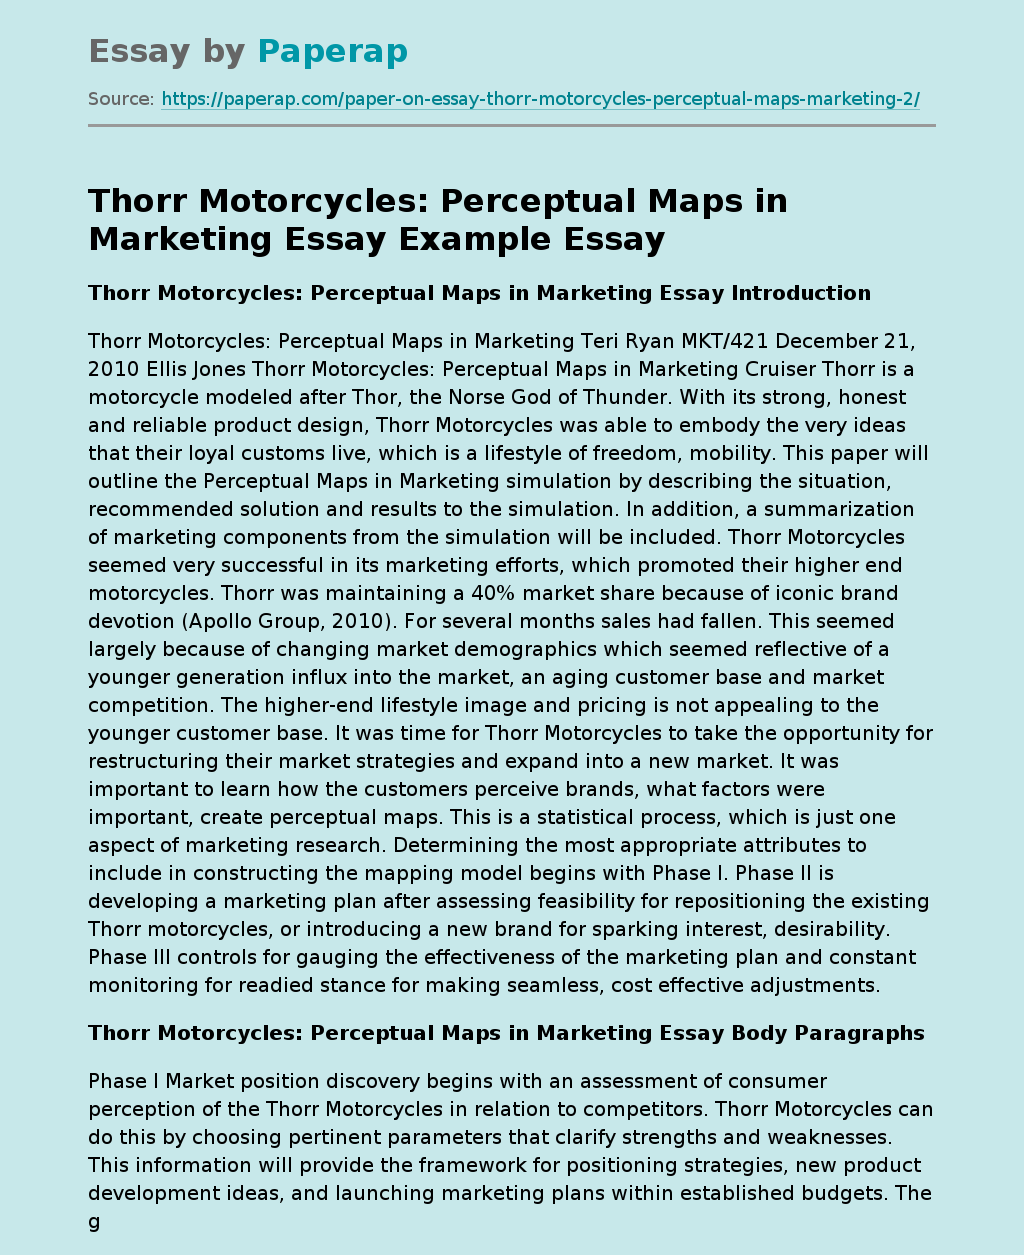 Thorr Motorcycles: Perceptual Maps in Marketing Essay Example